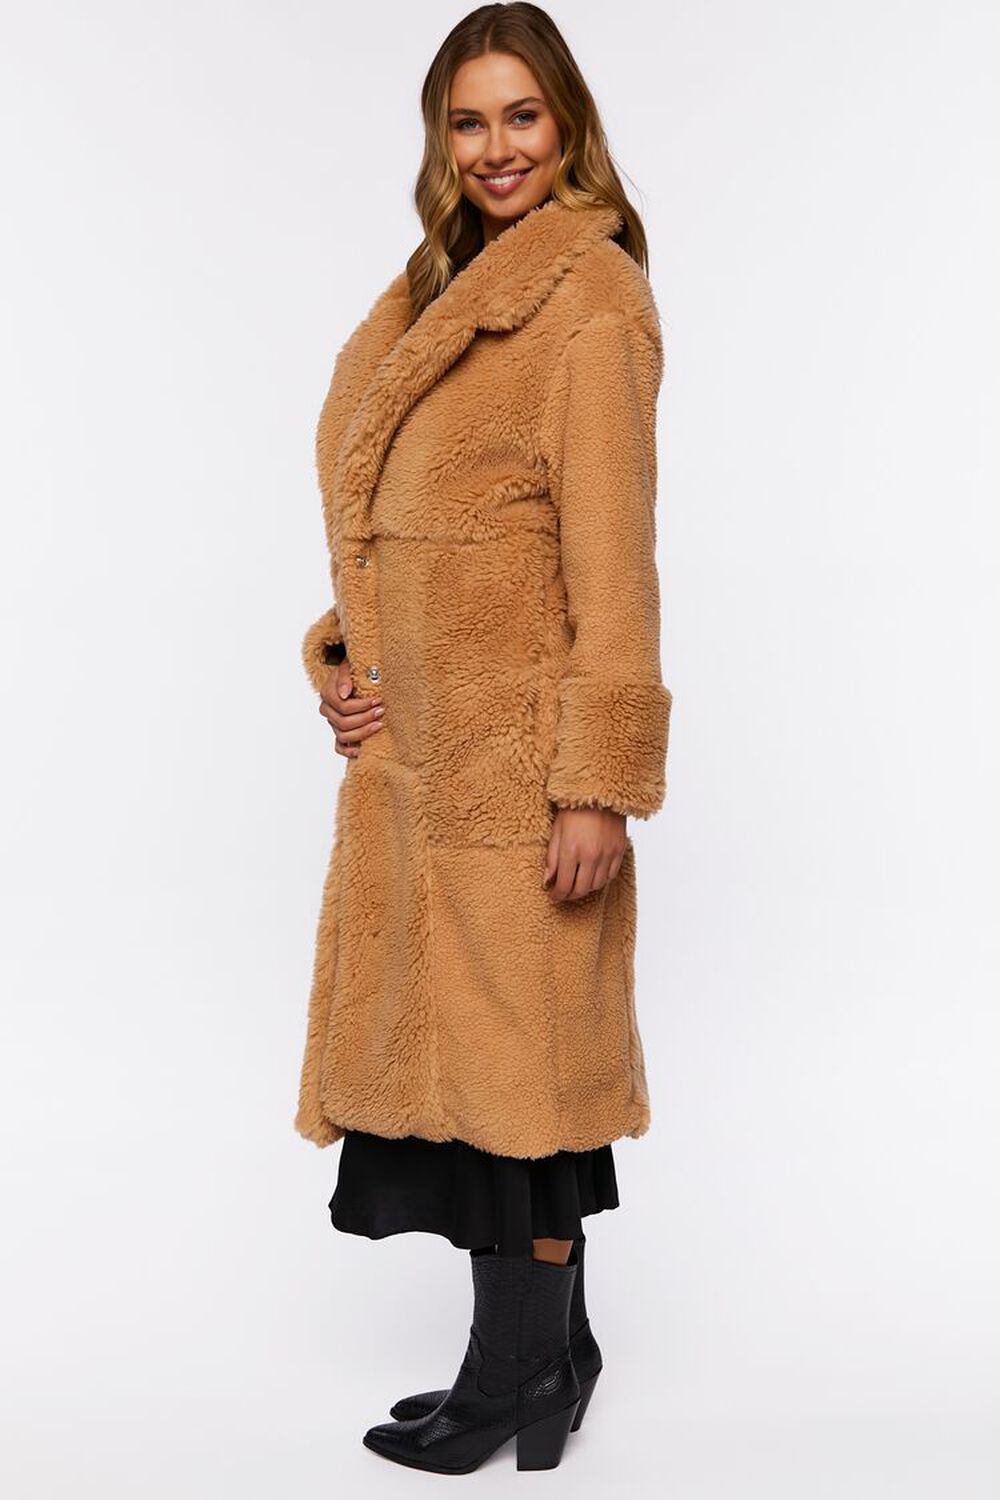 TAN Quilted Faux Shearling Duster Coat, image 2